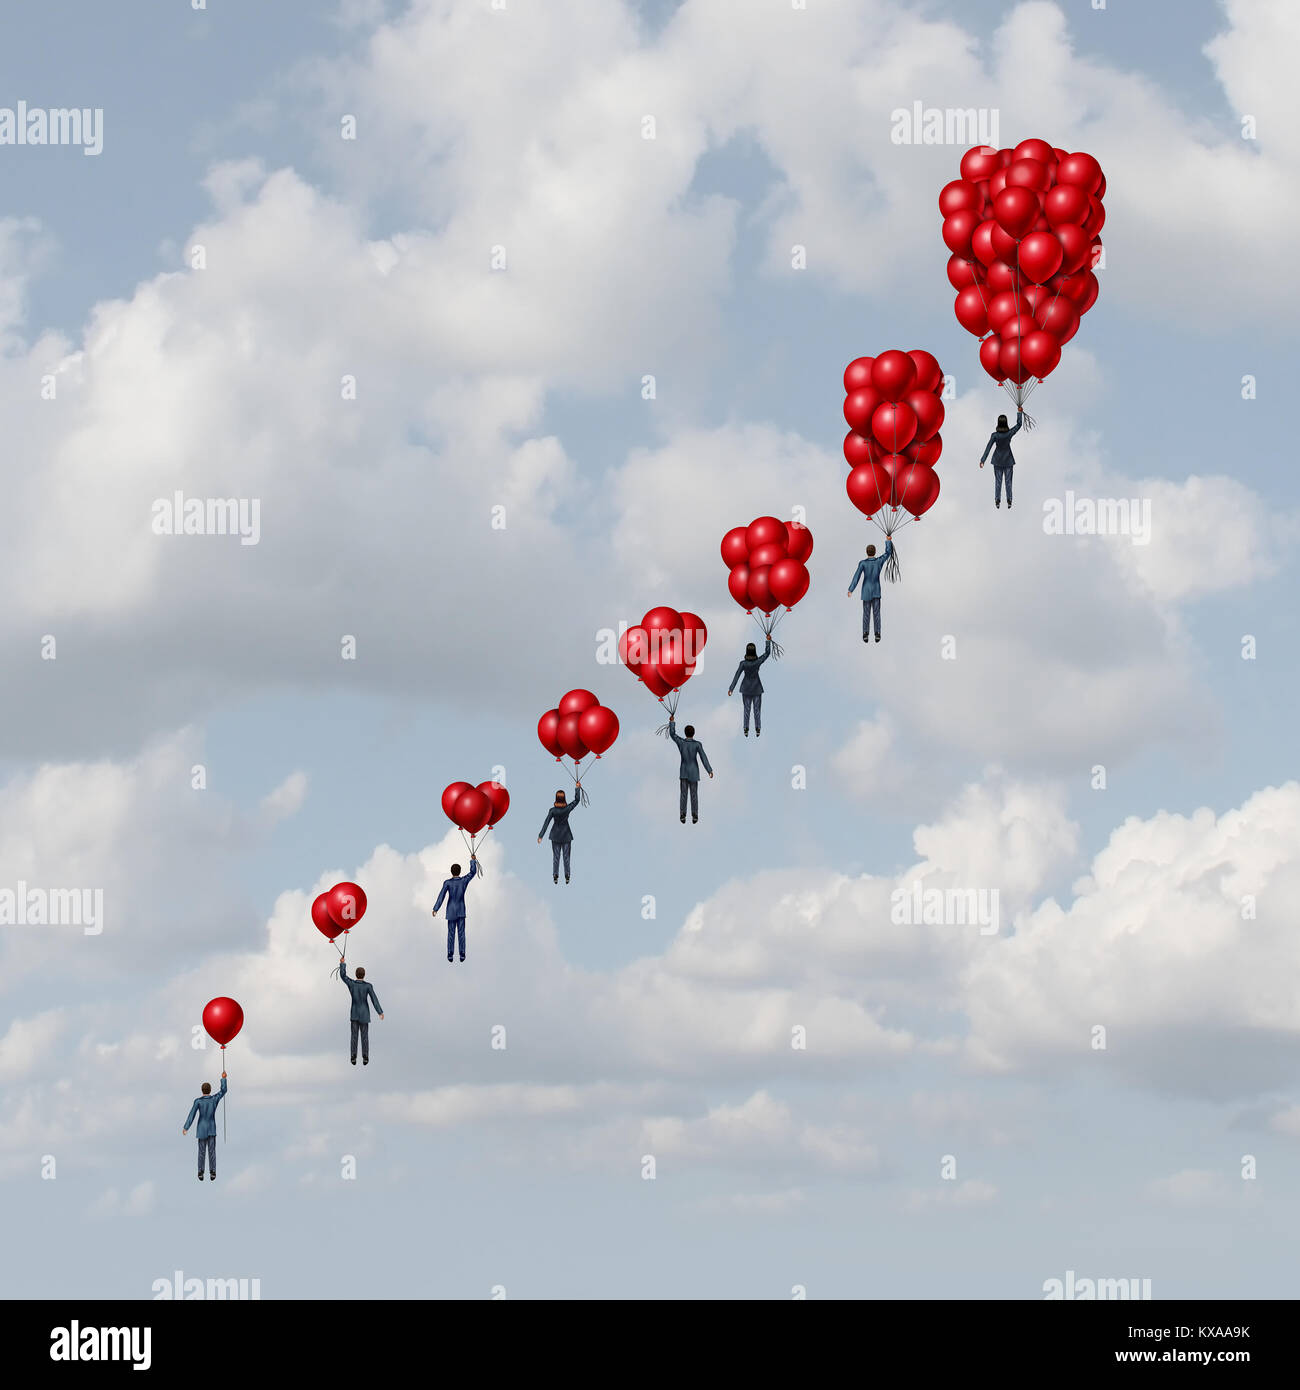 Business progress concept as a group of business people holding gradual increasing air balloons as a success metaphor with 3D illustration elements. Stock Photo